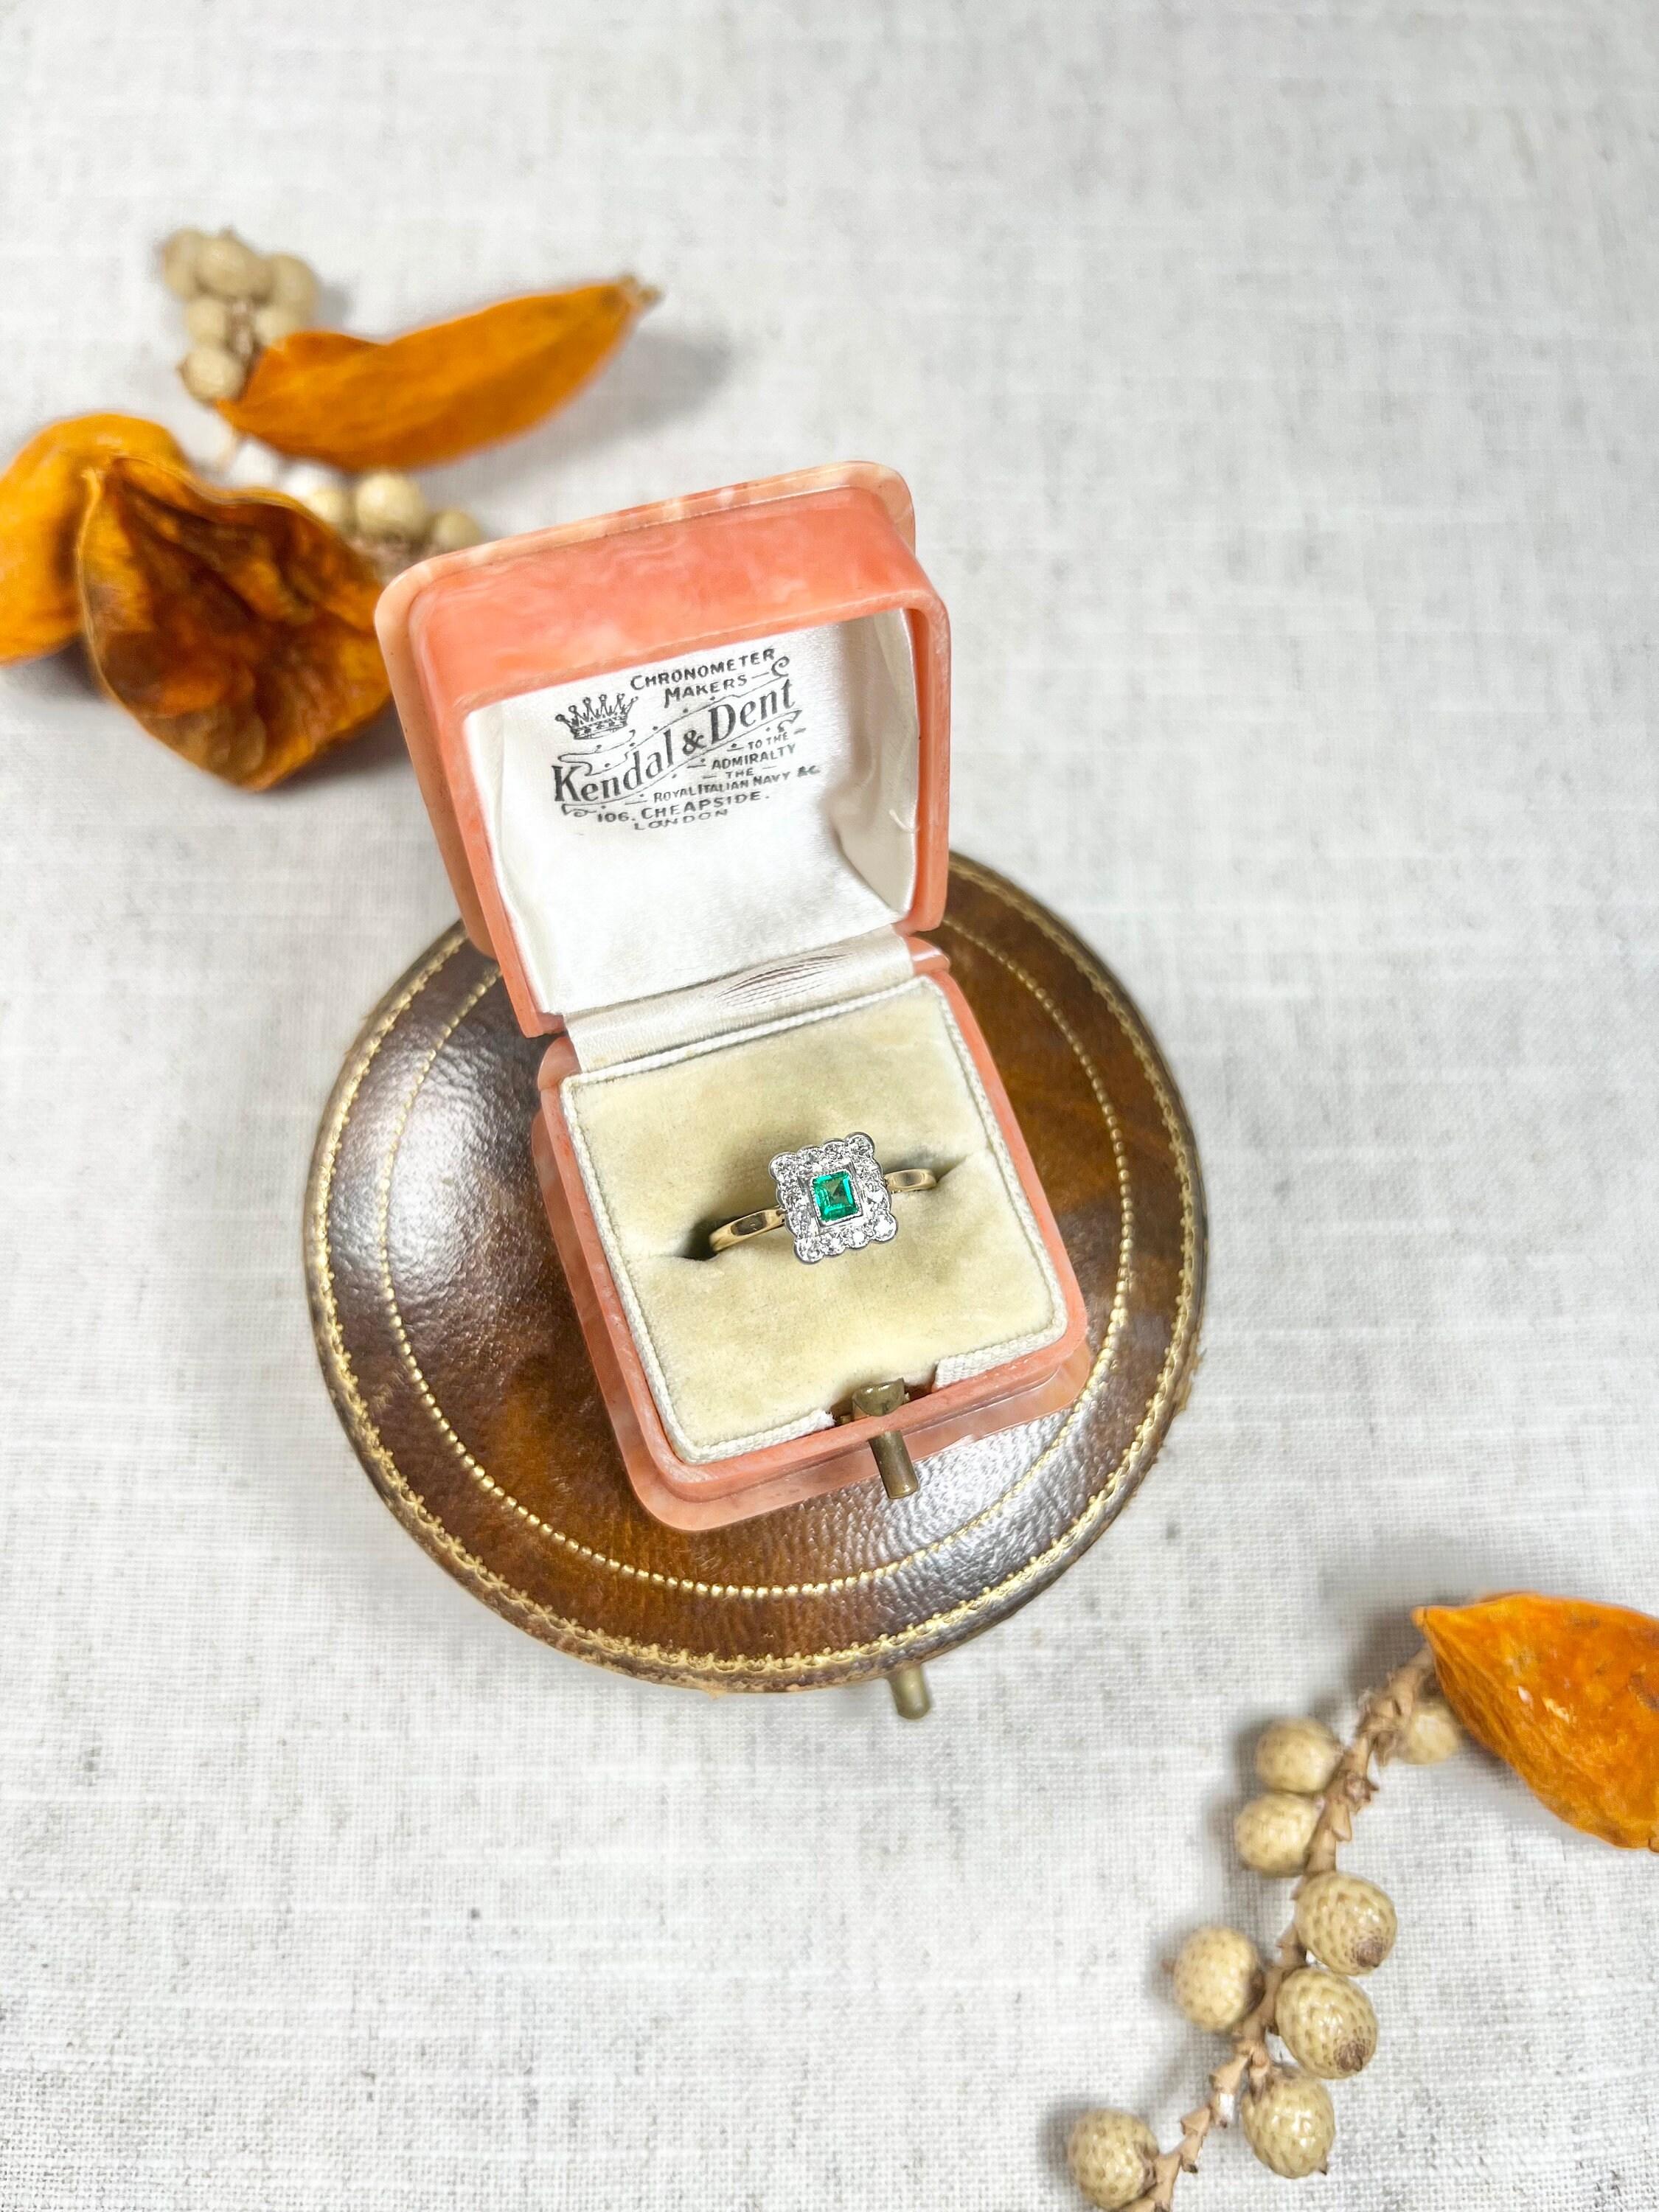 Antique Emerald Cluster Ring

18ct Gold & Platinum Tested

Circa 1910

This exquisite Edwardian-era ring is a true gem in every sense of the word. Crafted from 18ct yellow gold and platinum, this stunning square-shaped cluster ring features a centre